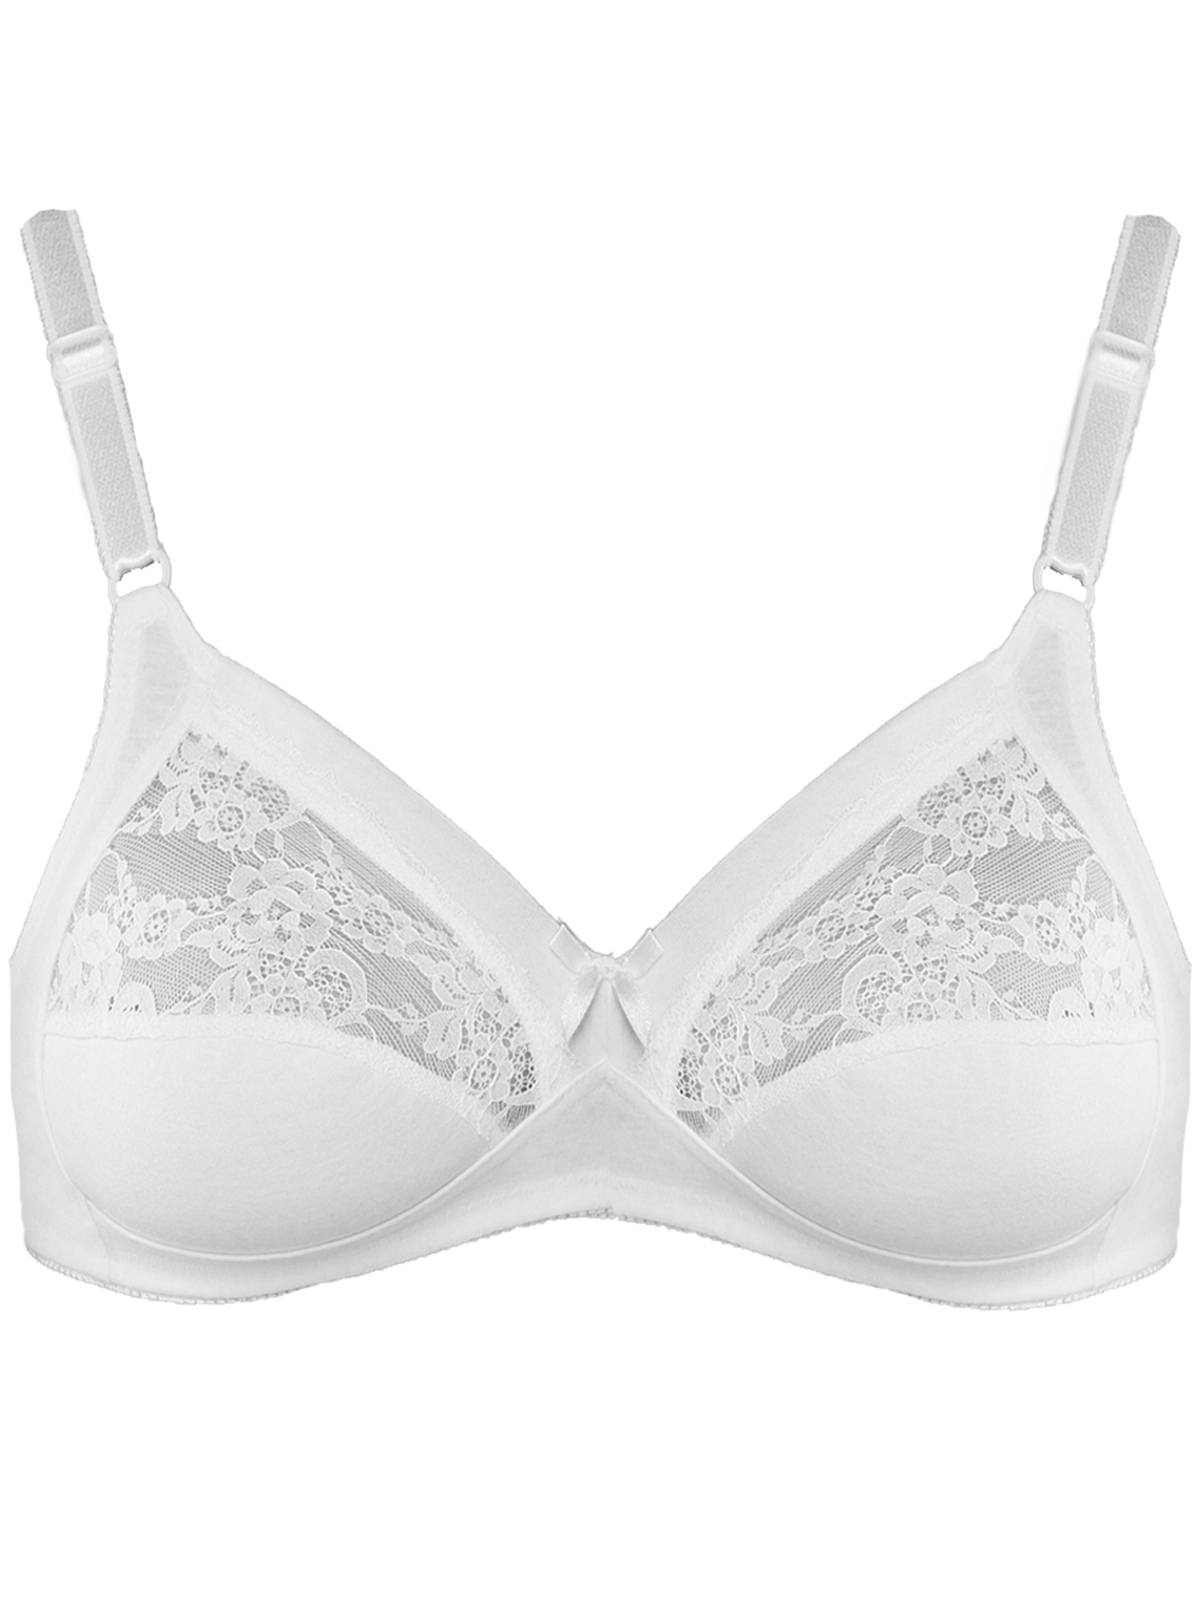 Naturana - - Naturana WHITE Floral Lace Full Cup Bra - Size 34 to 46 (B ...